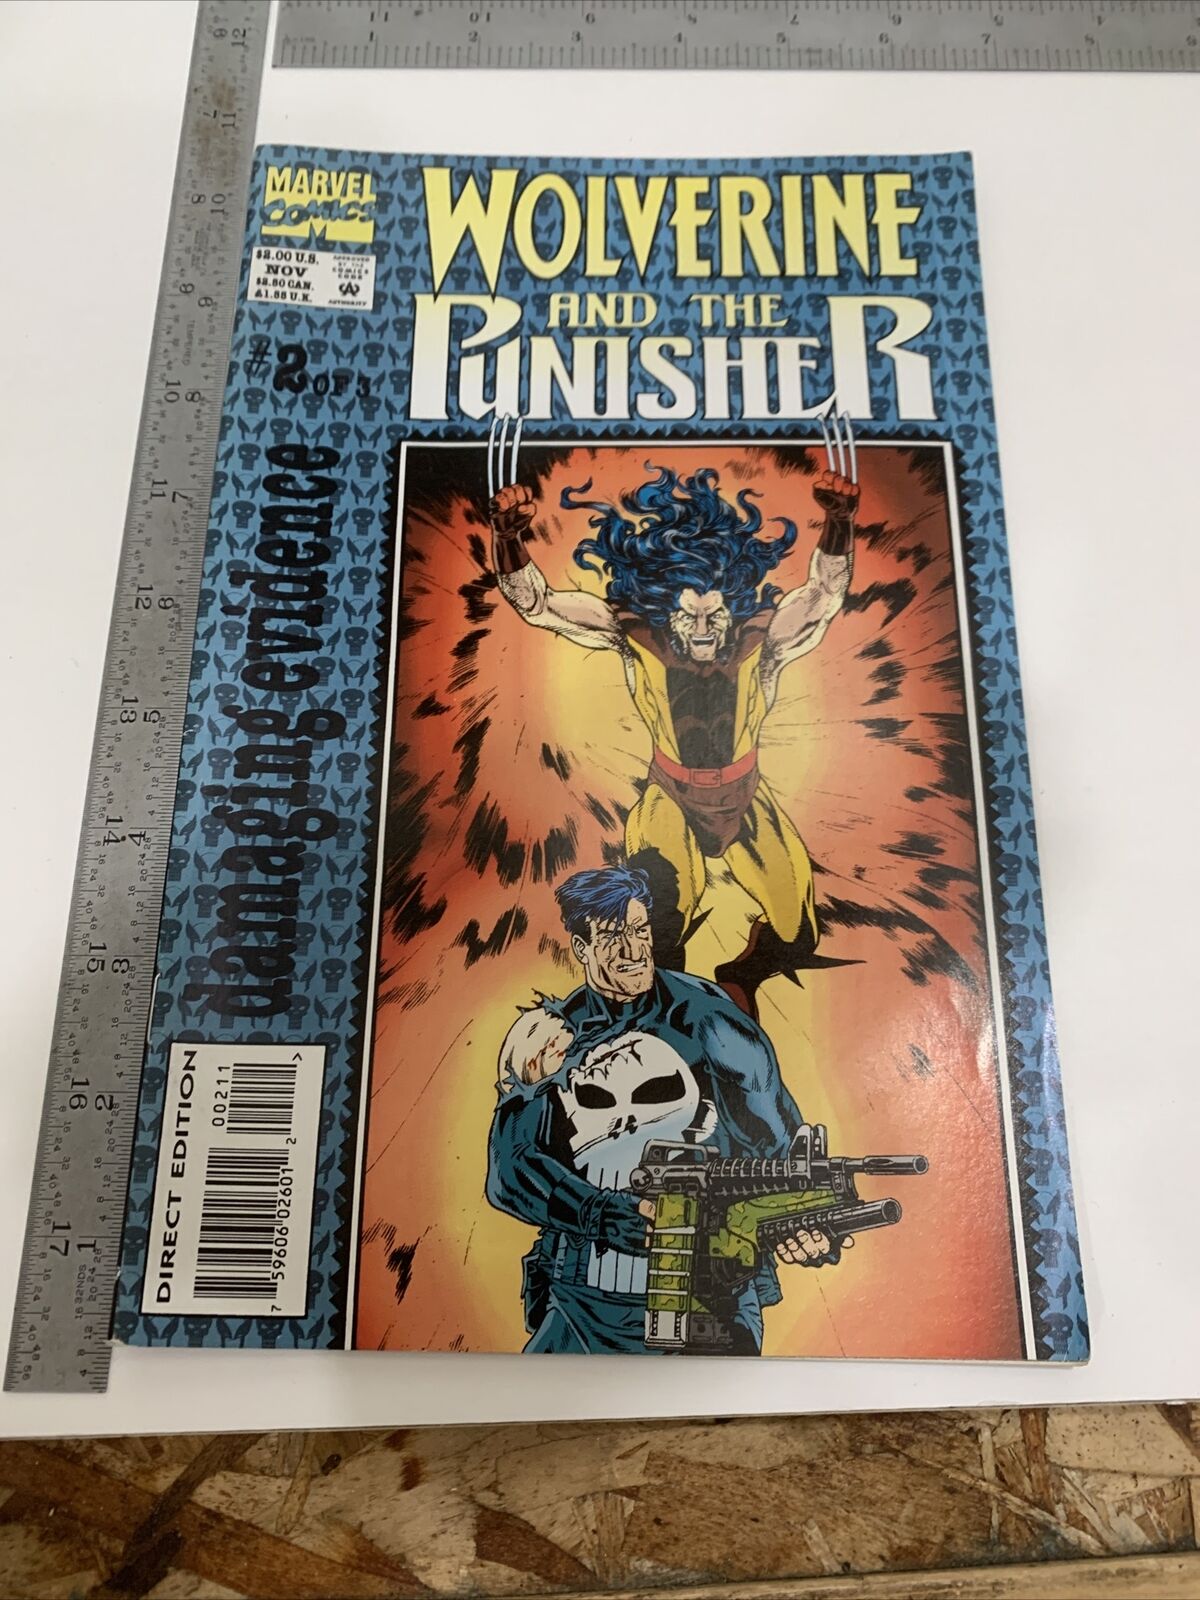 Wolverine and the Punisher #2 of 3 damaging evidence